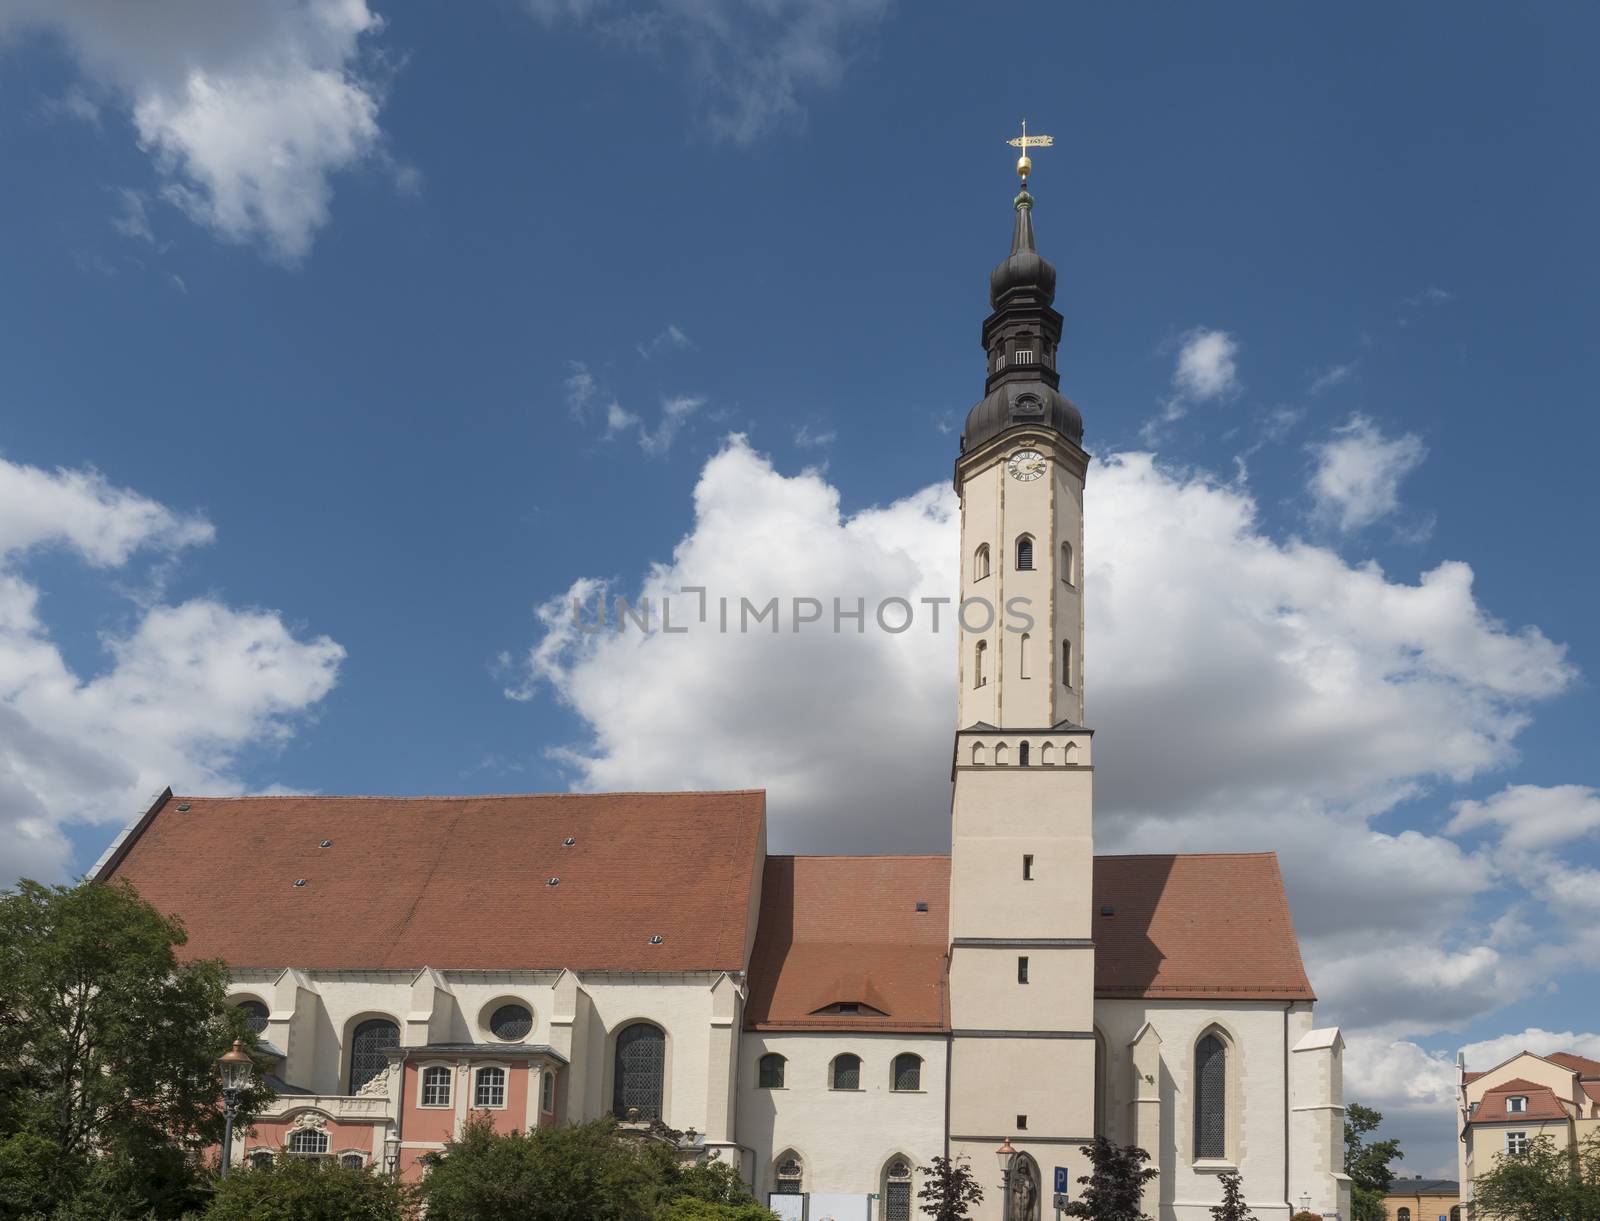 St. Pauls church in Historic old town of Zittau, Saxony, Germany. Summer sunny day, blue sky by Henkeova